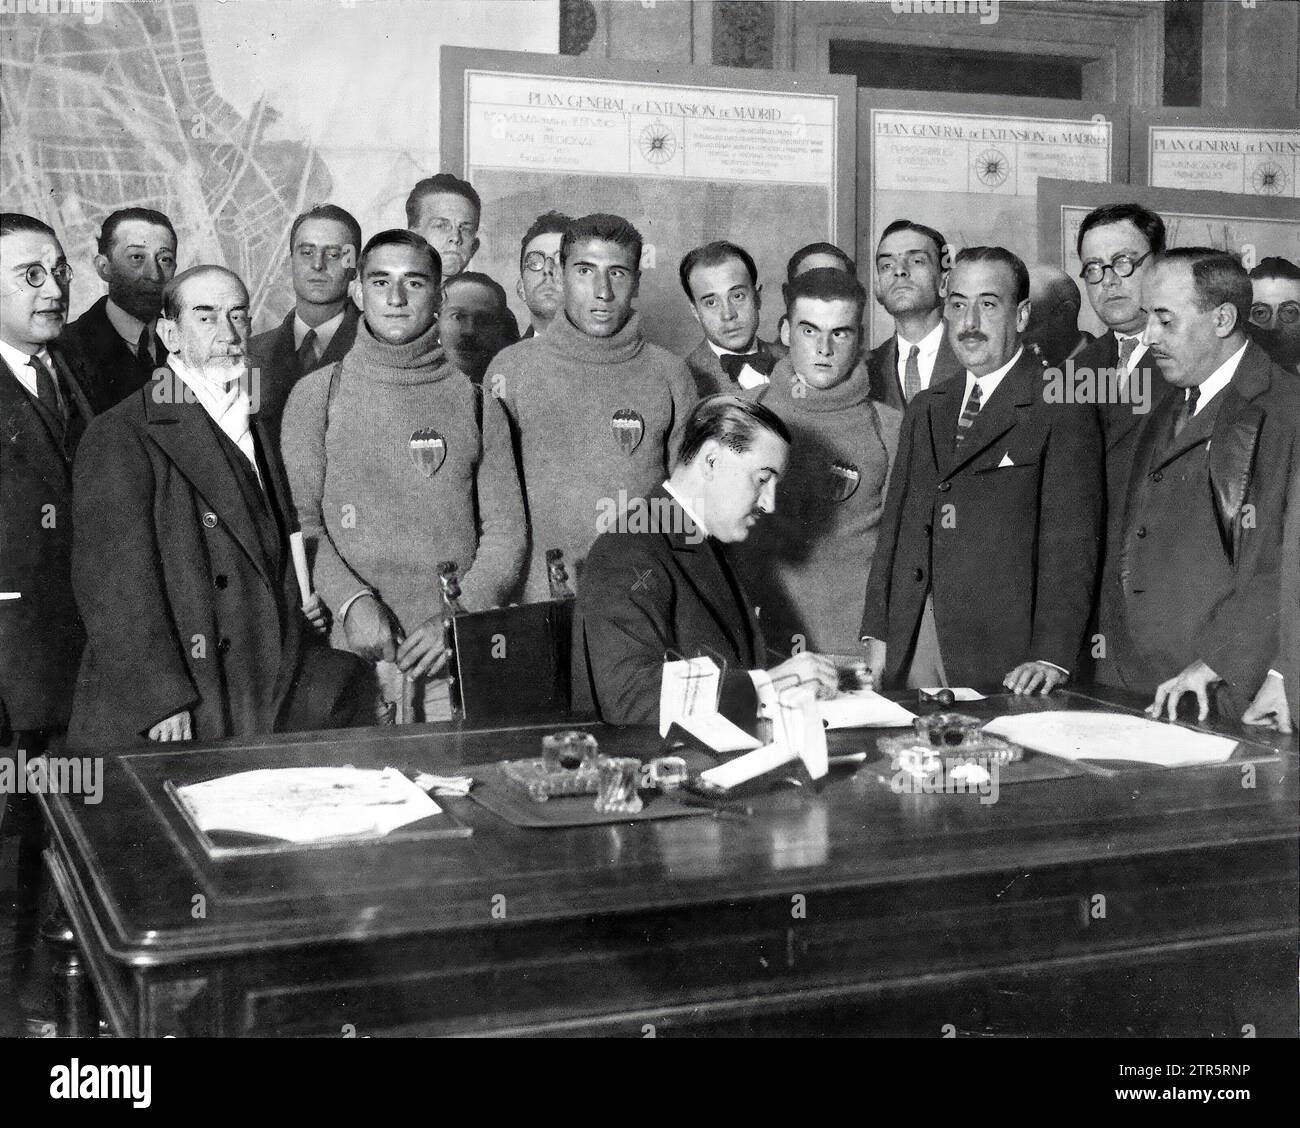 10/31/1926. Madrid, in the glass patio of the town hall, the mayor, Conde de Vallellano (X), signing the album of the Valencian marchers Luis Archelos, Manuel Lora and Vicente Cucarella, who appear behind him in the photograph. Credit: Album / Archivo ABC / Portela Stock Photo